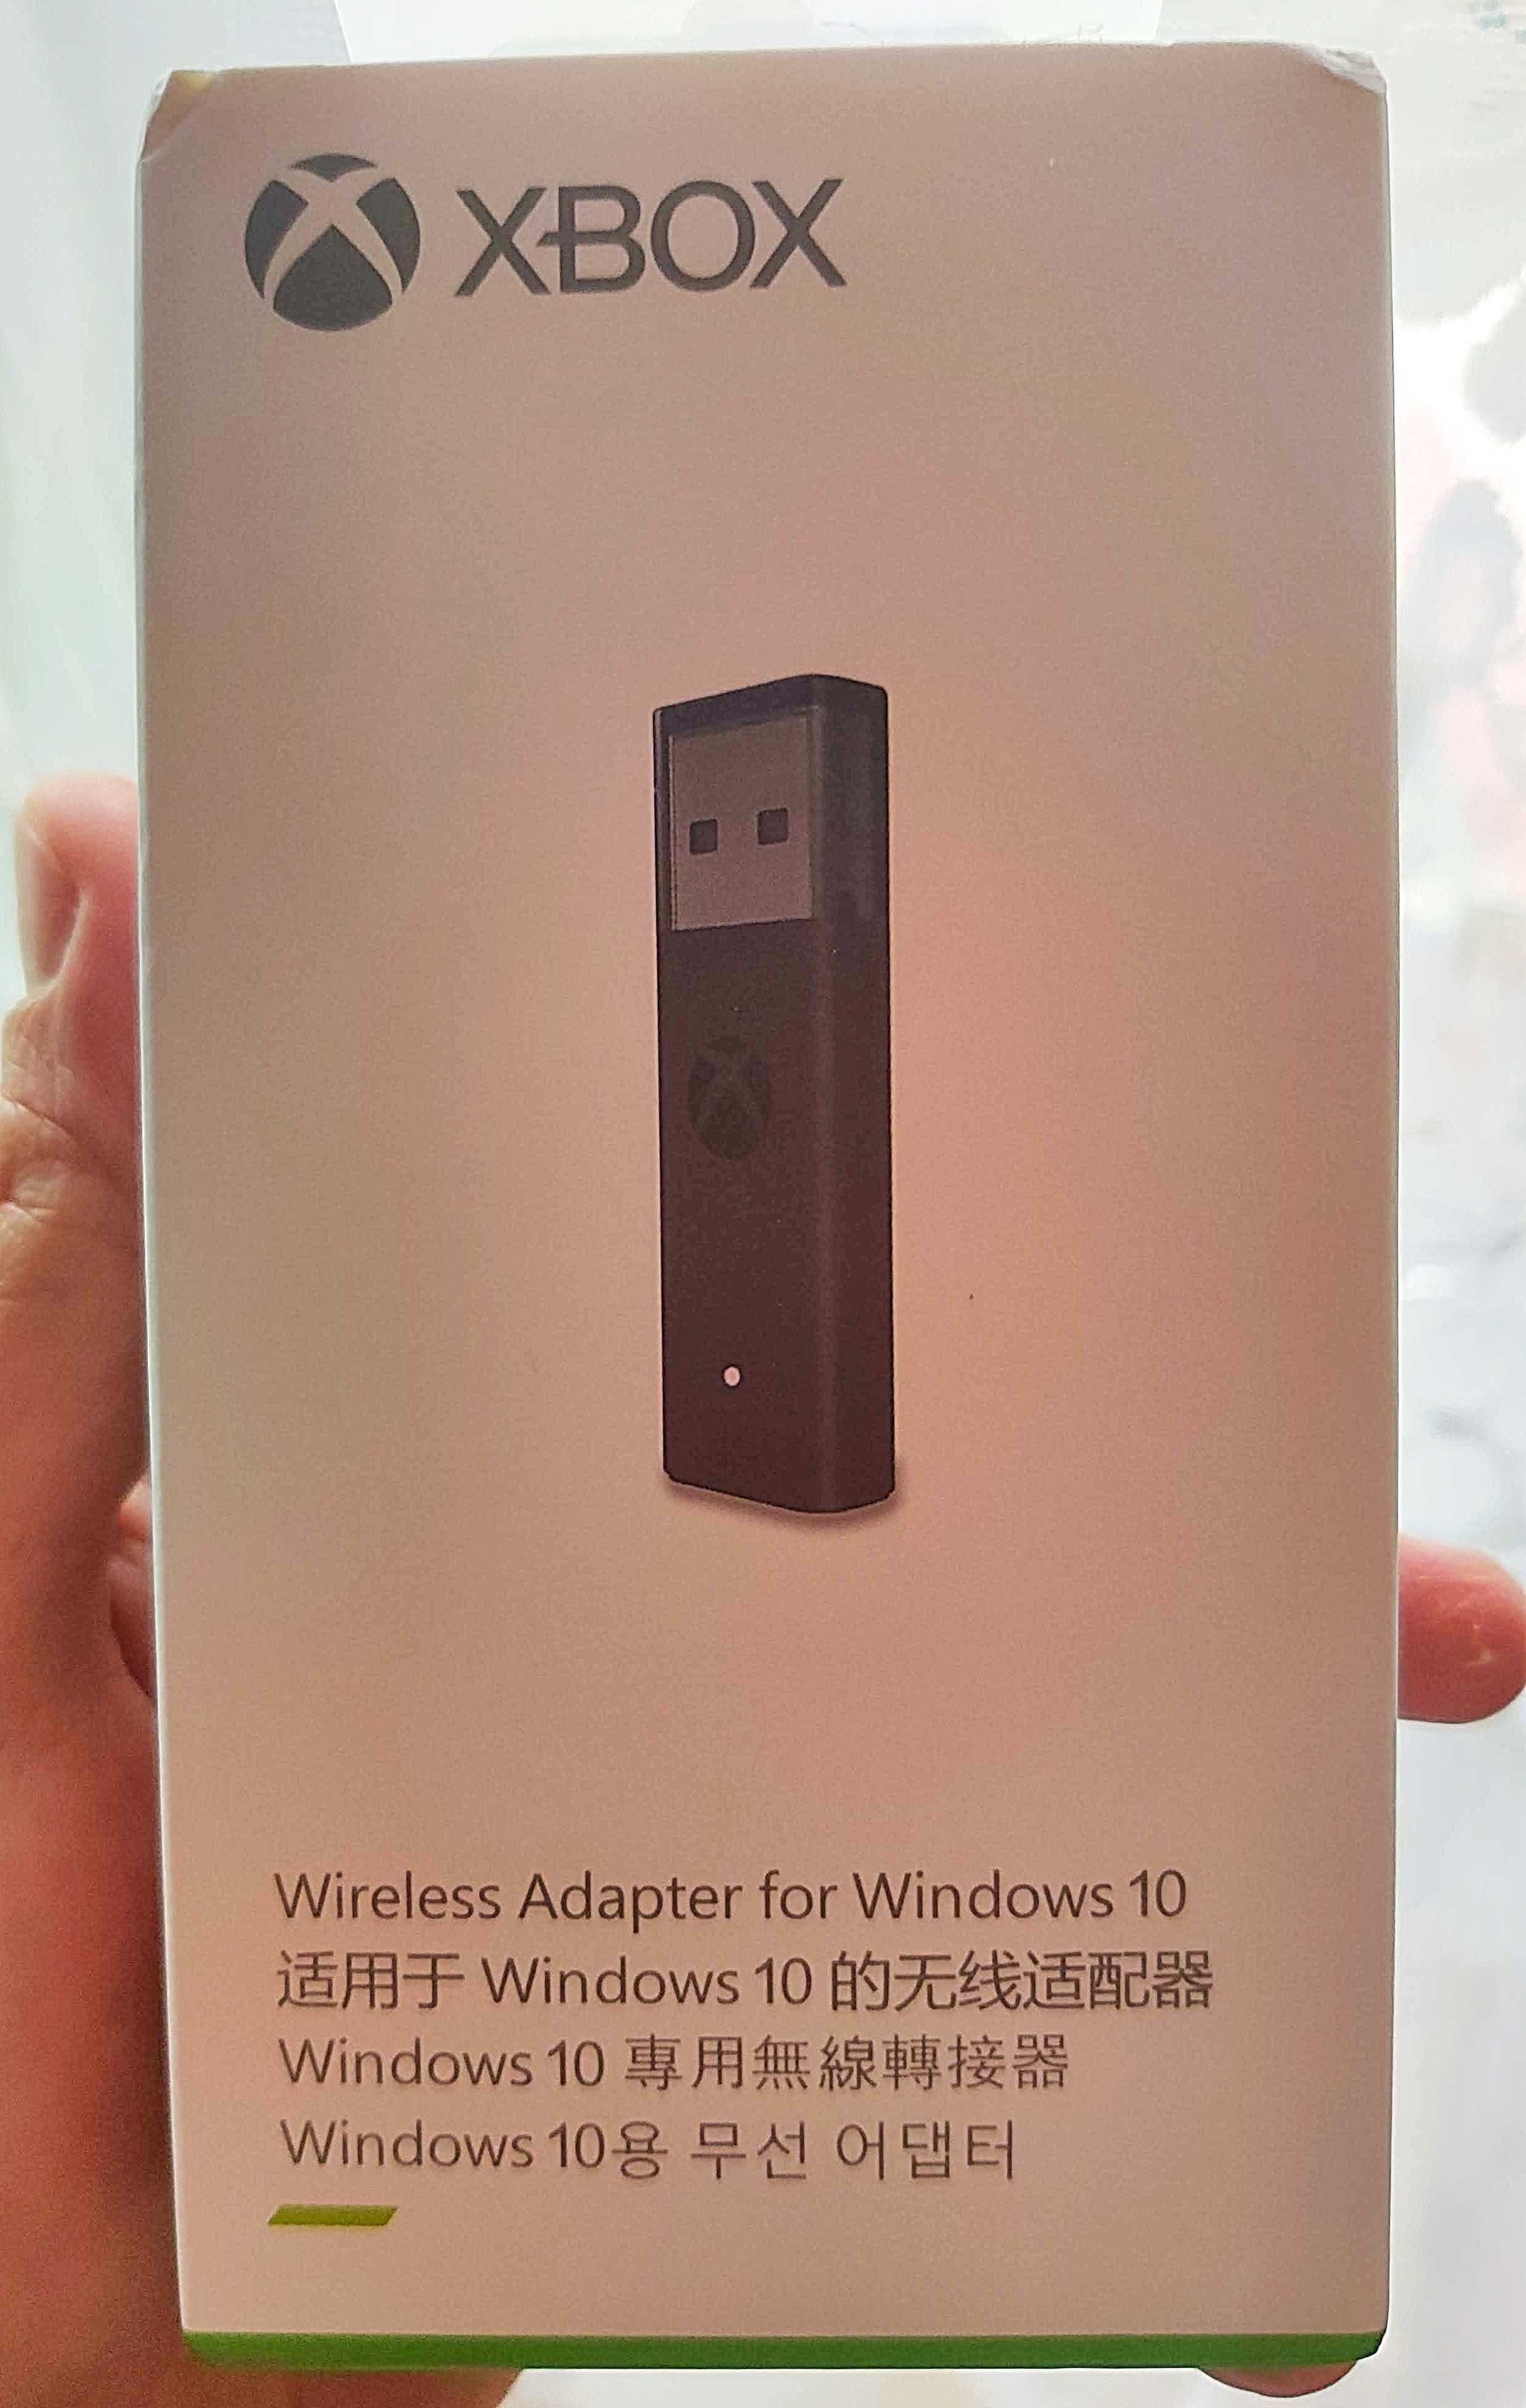 Xbox Wireless Adapter for Windows 10-11 in Box